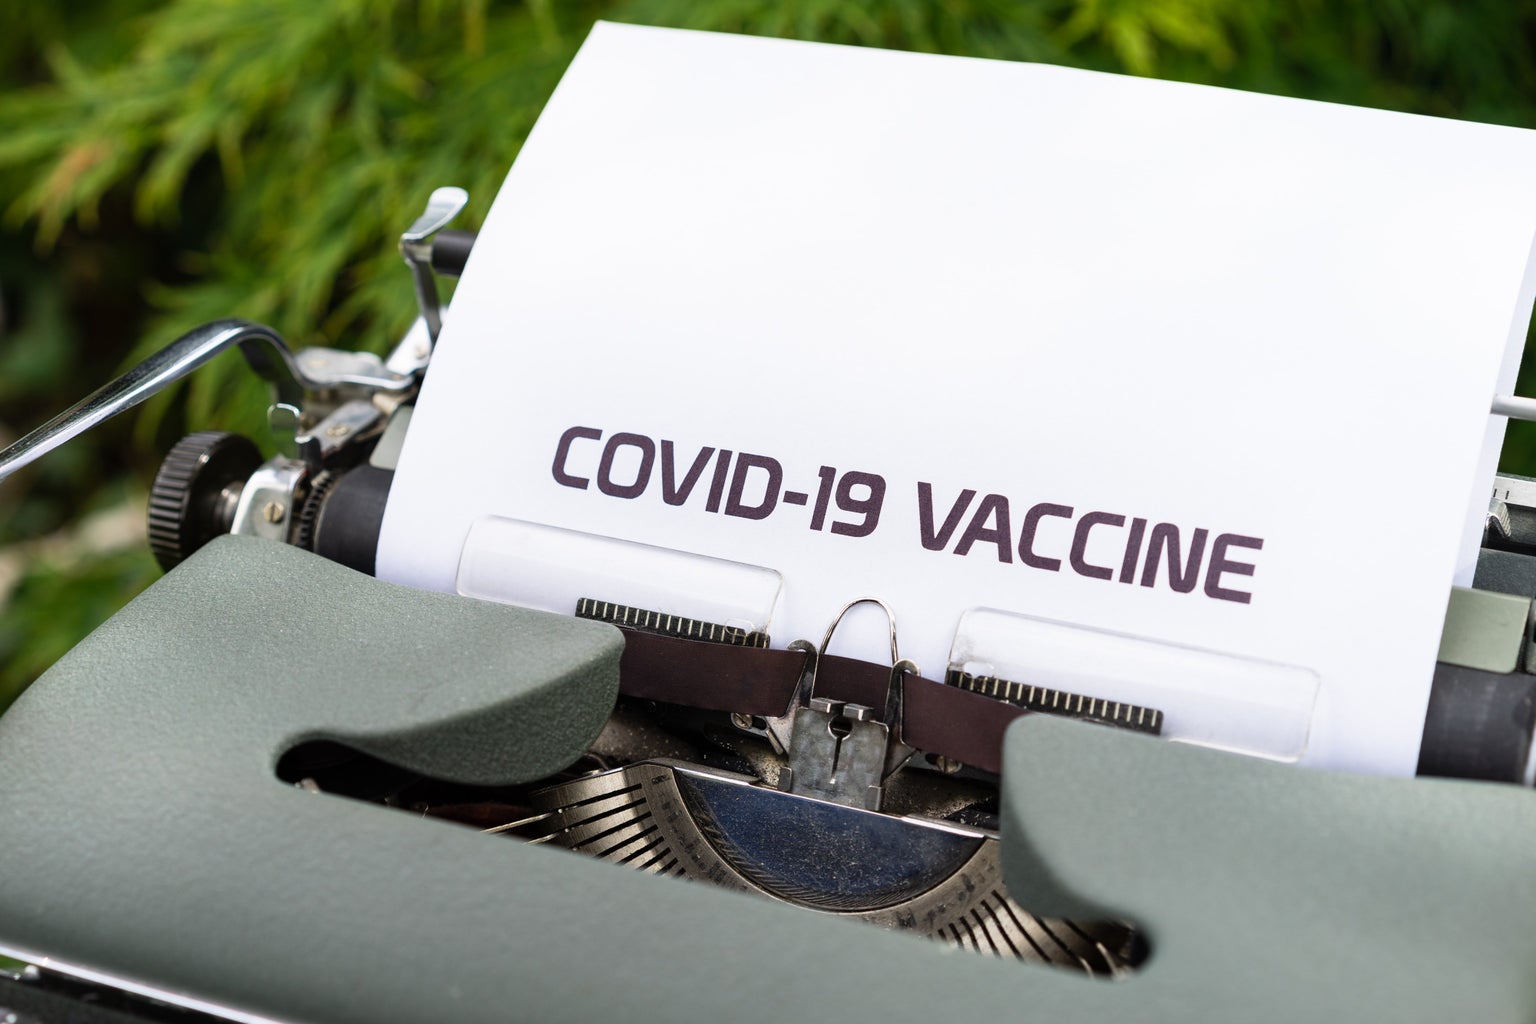 "COVID-19 VACCINE" typed on paper in a typewriter